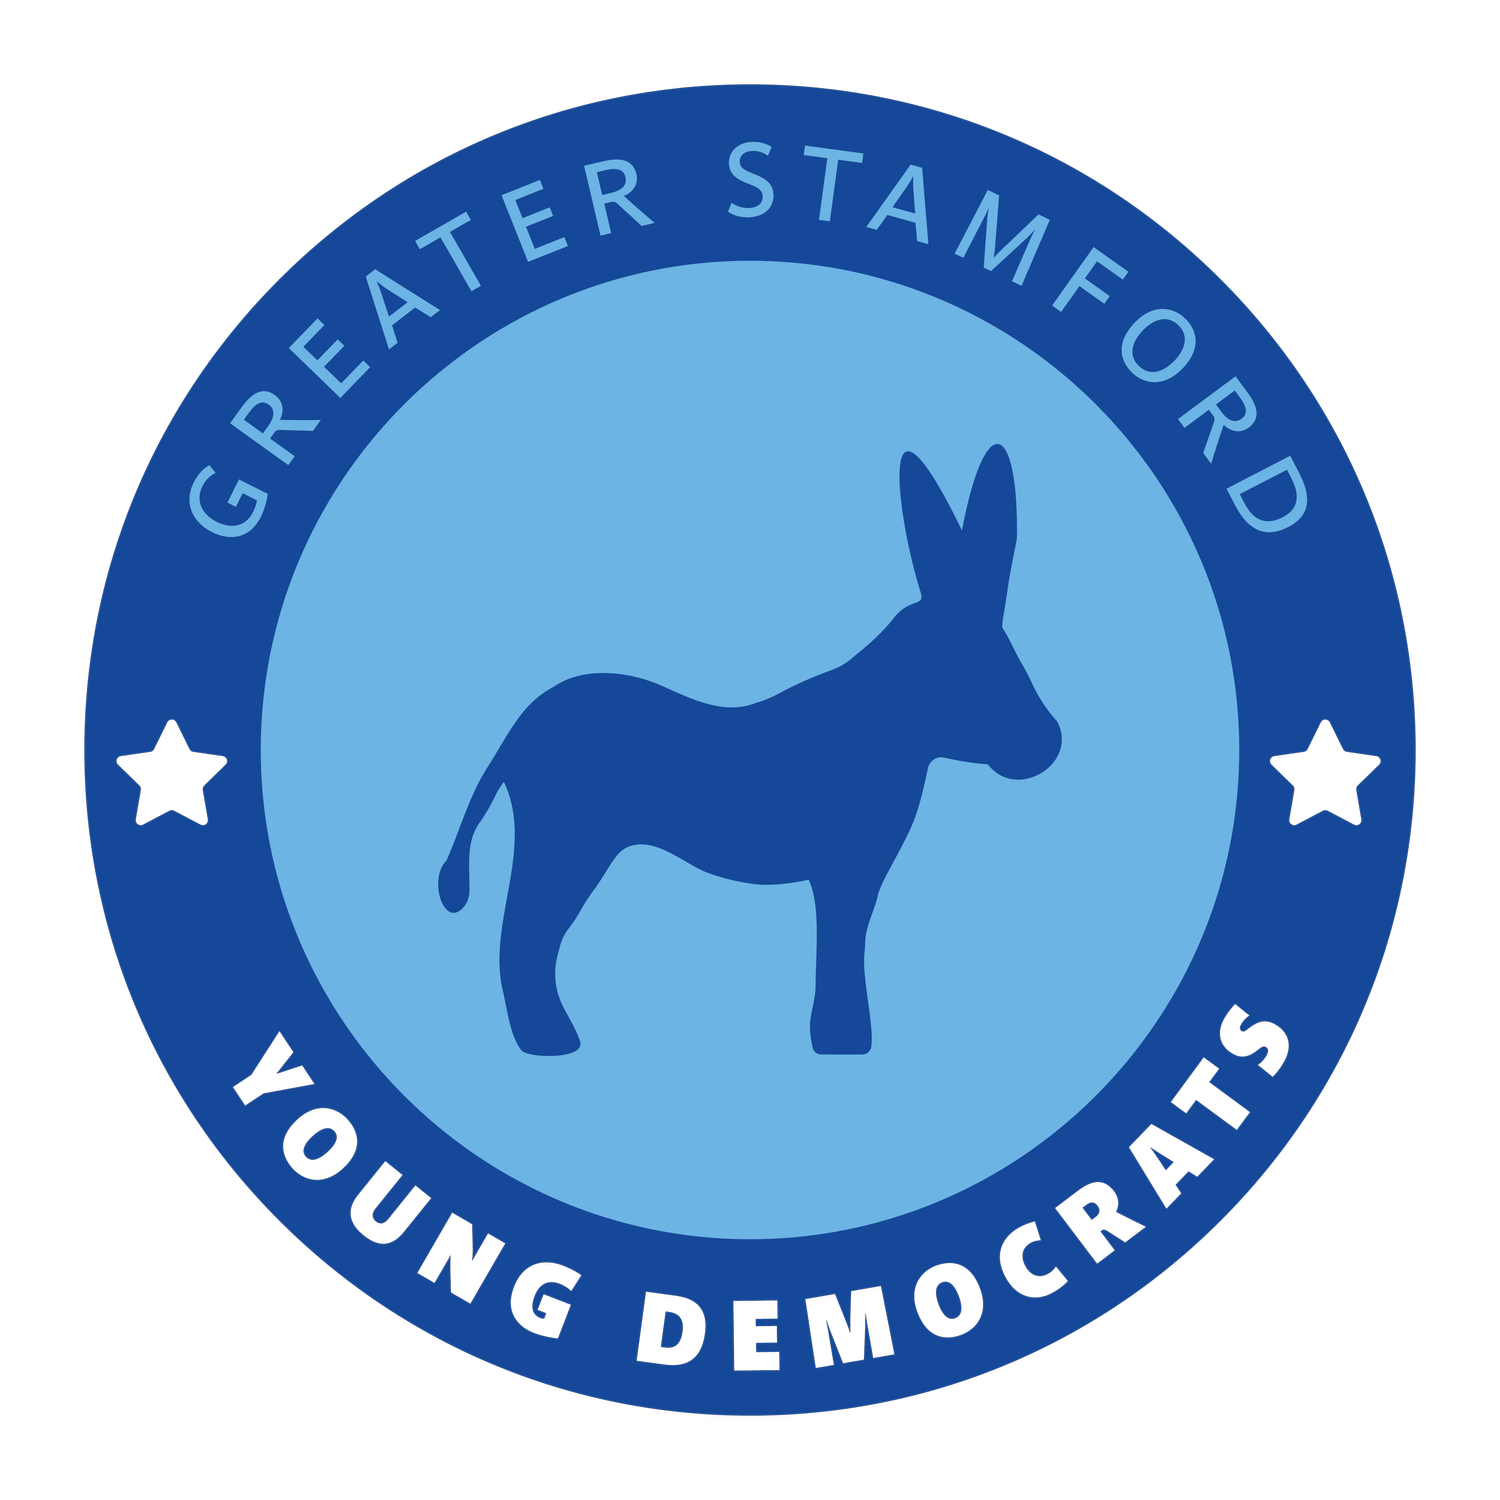 Greater Stamford Young Democrats